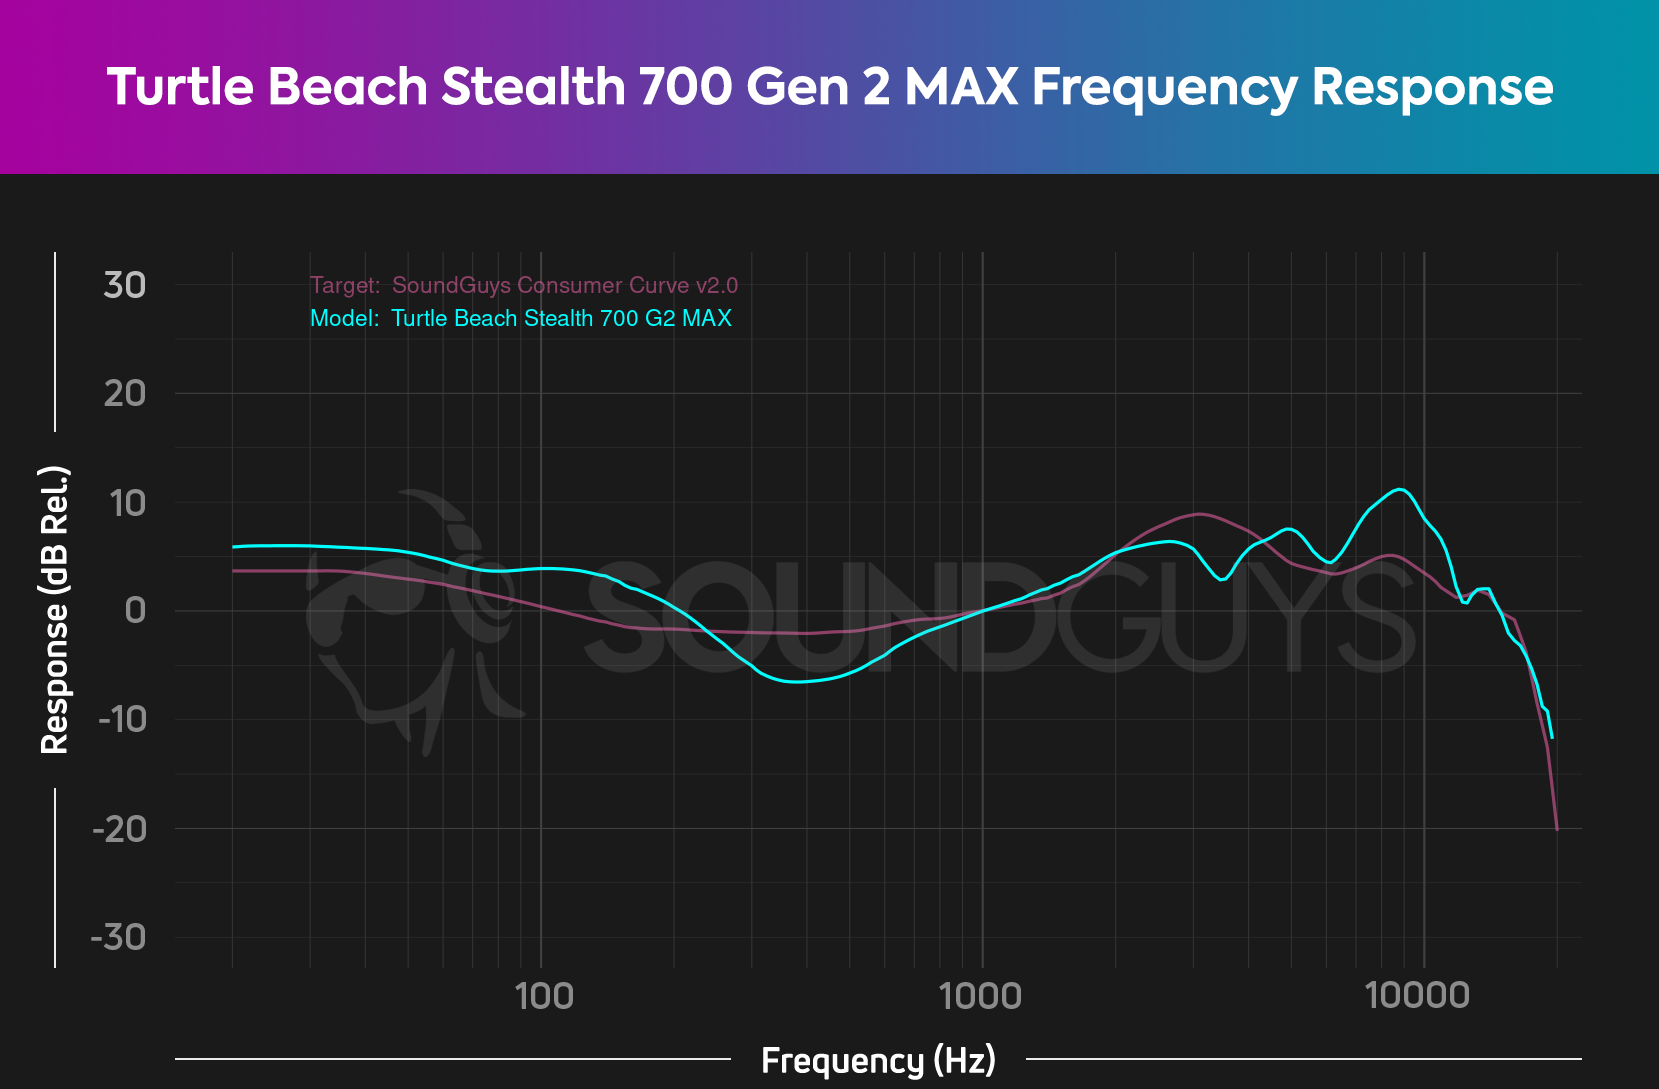 The frequency response of the Turtle Beach Stealth 700 Gen 2 MAX, which follows our ideal curve fairly closely.